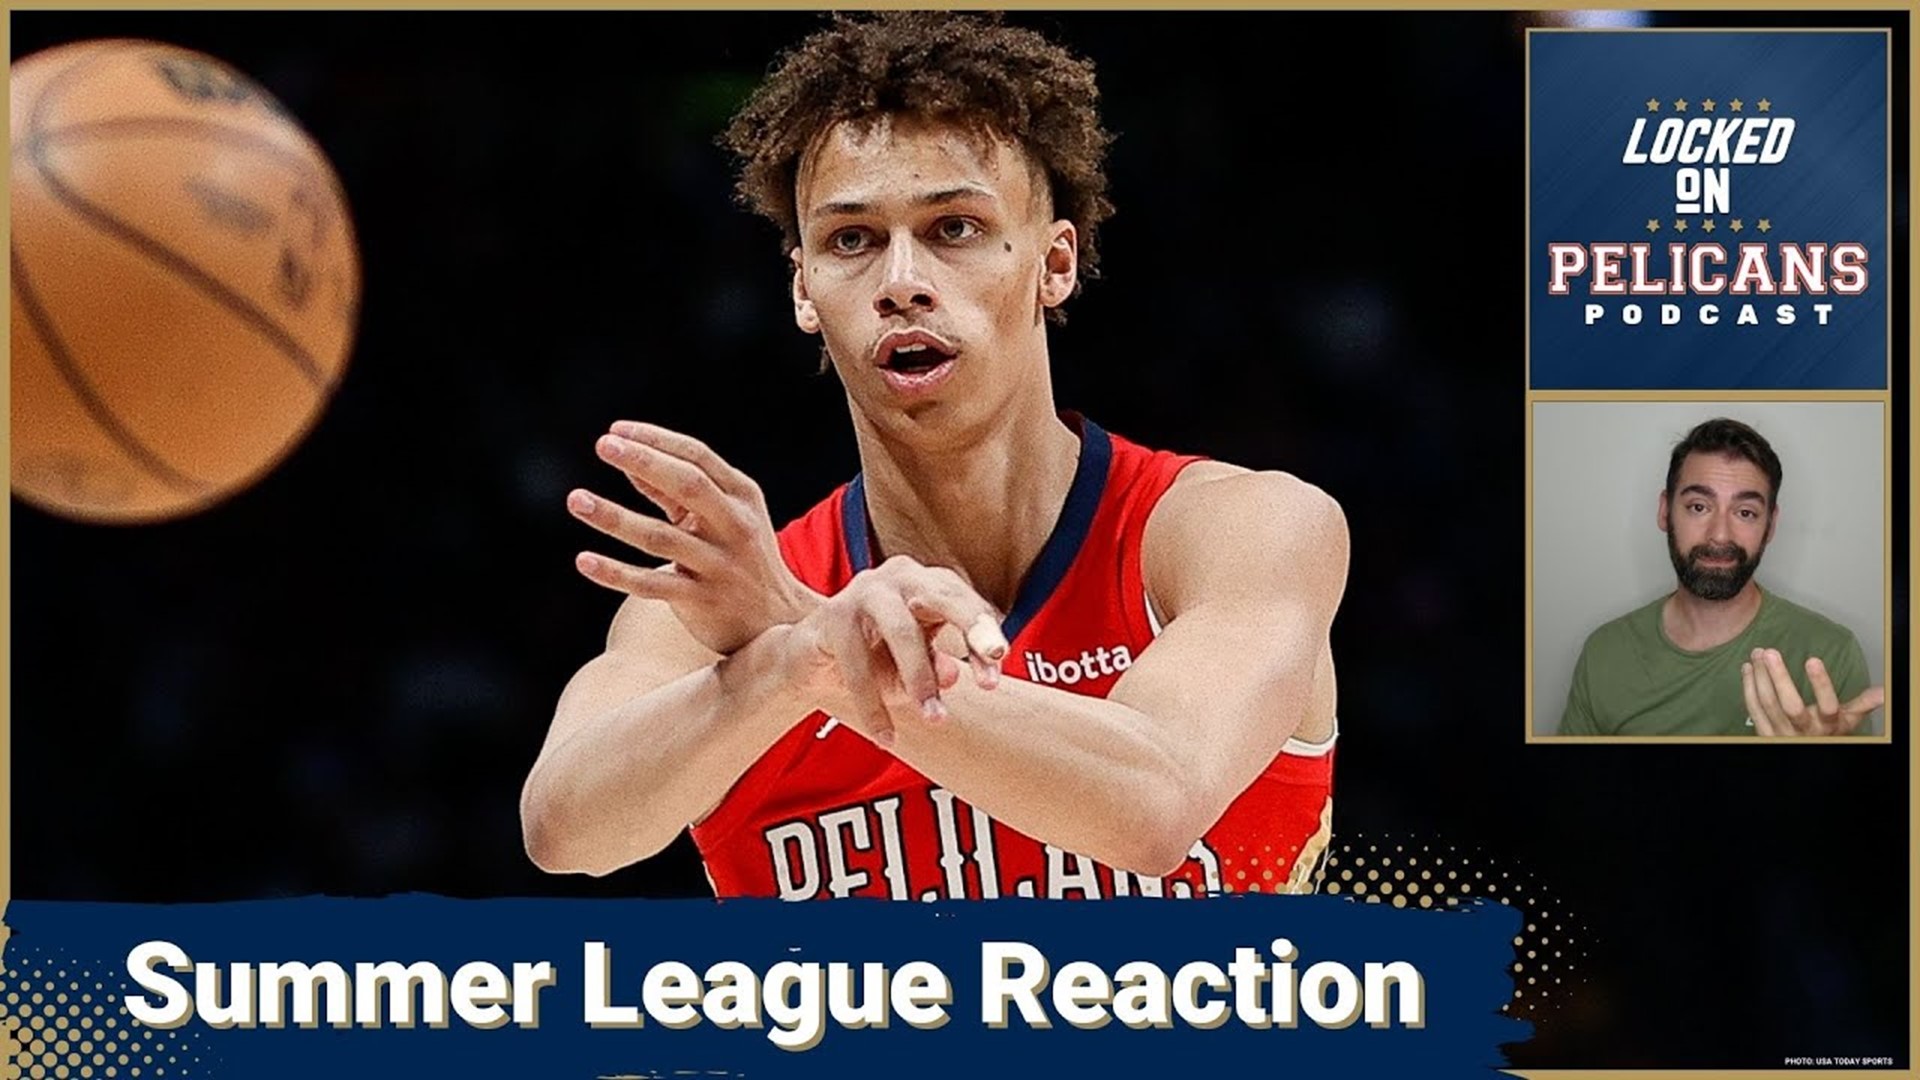 The New Orleans Pelicans had their first Summer League game and while they turned the ball over a lot, Jake Madison liked what he saw from a few players